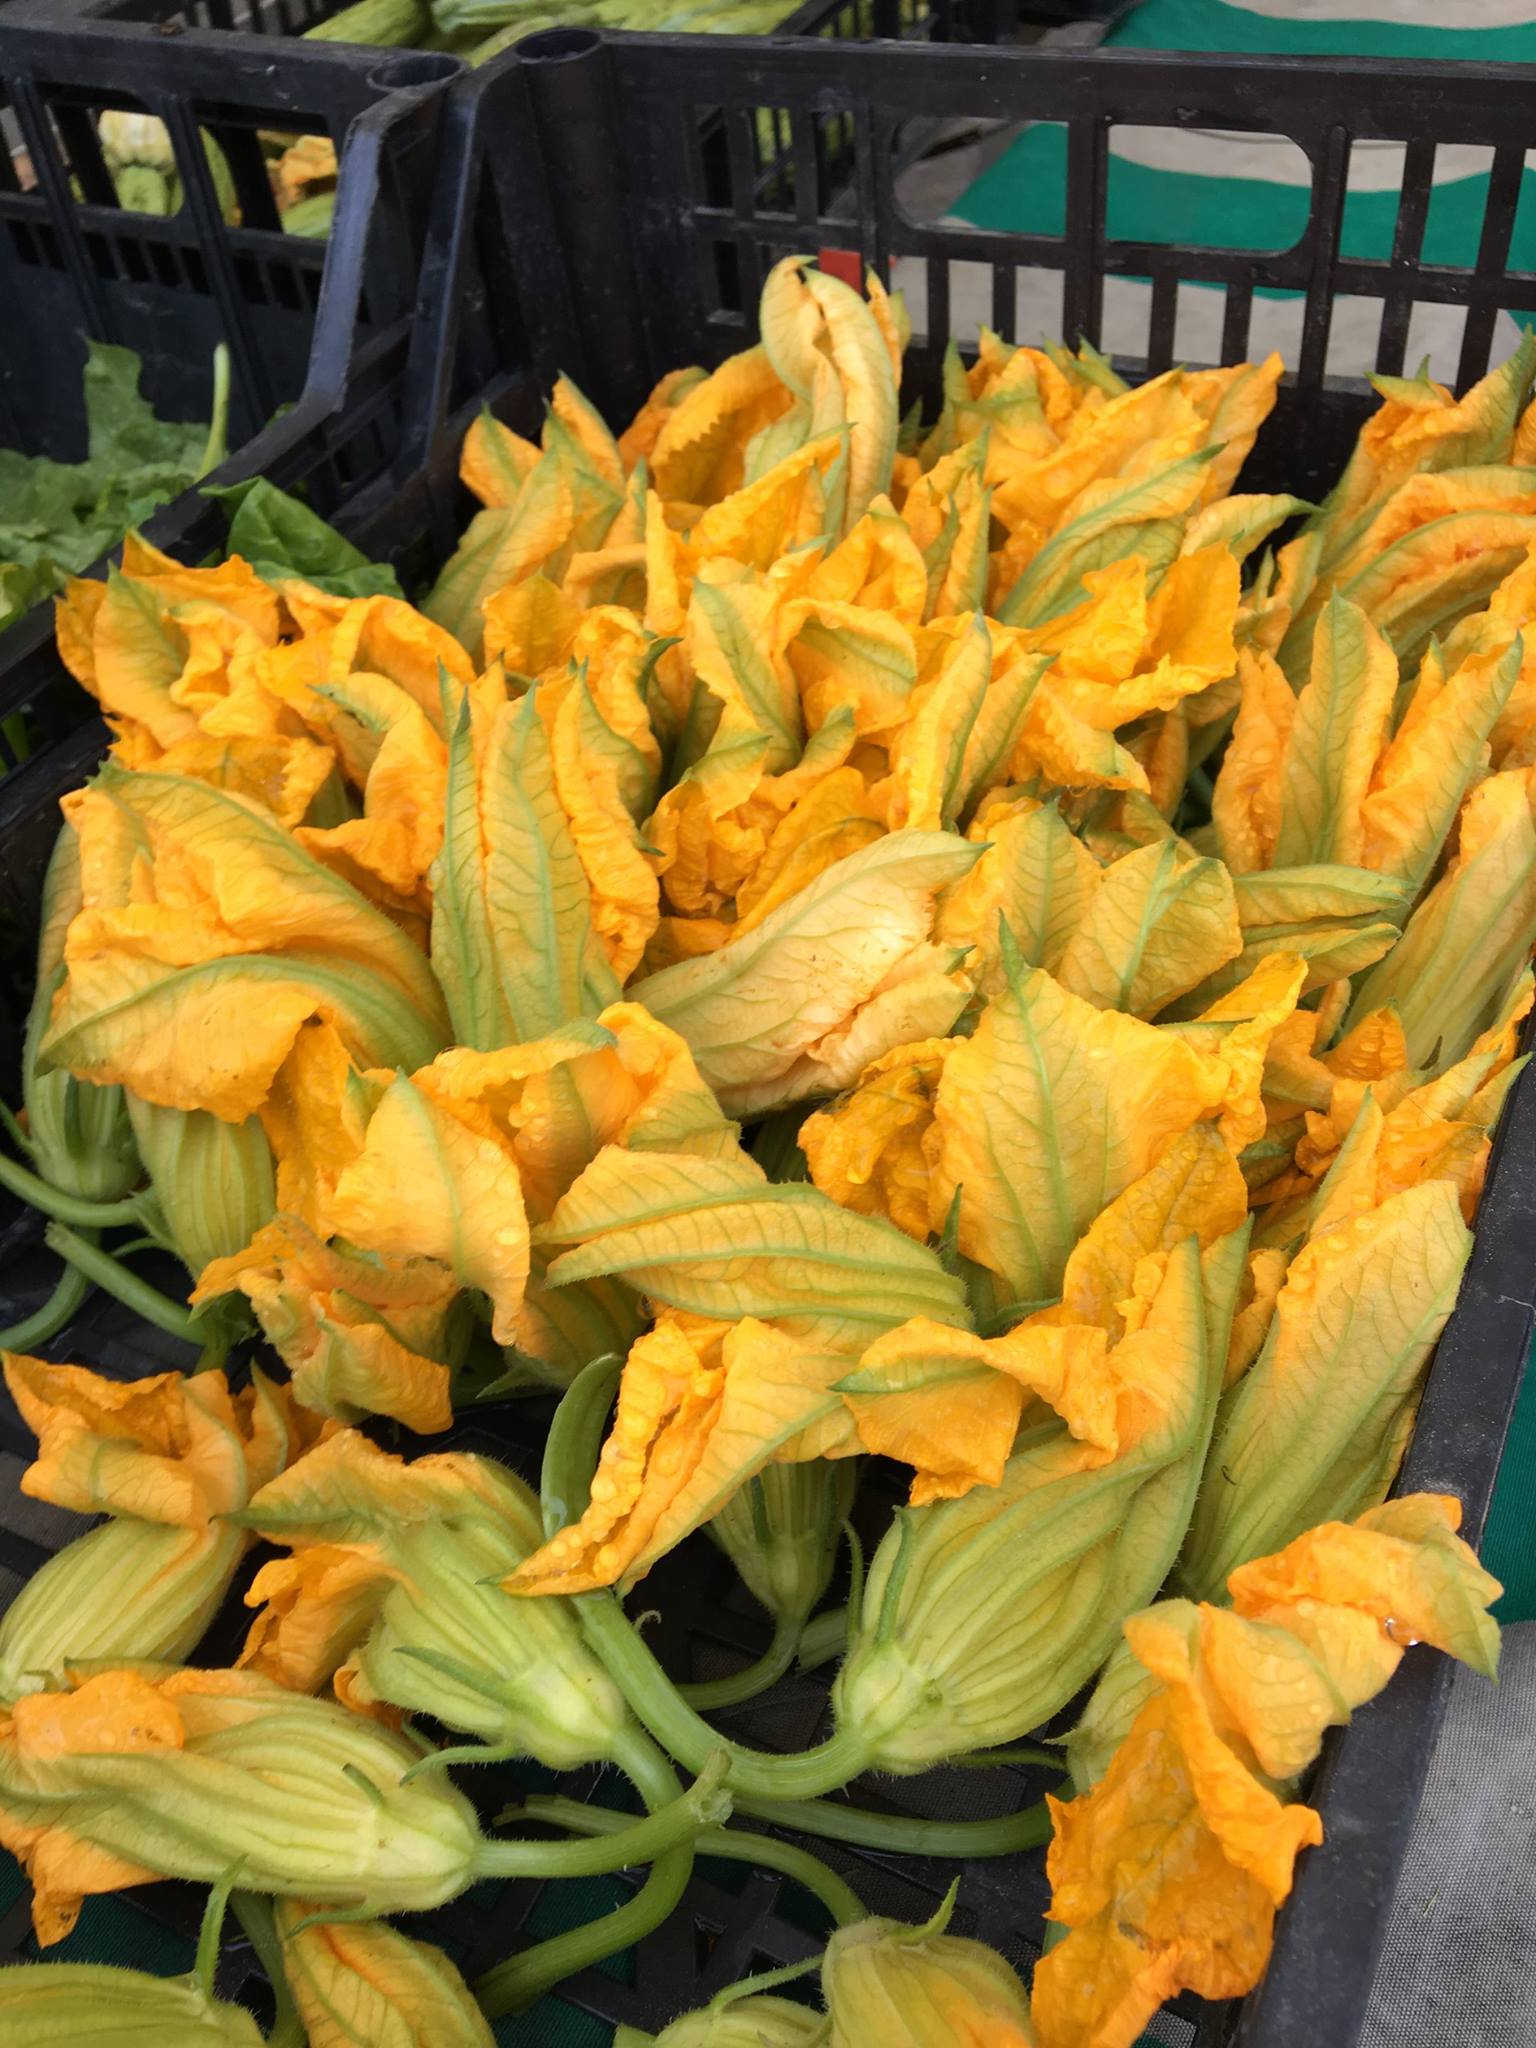 zucchini flowers at a market in Italy